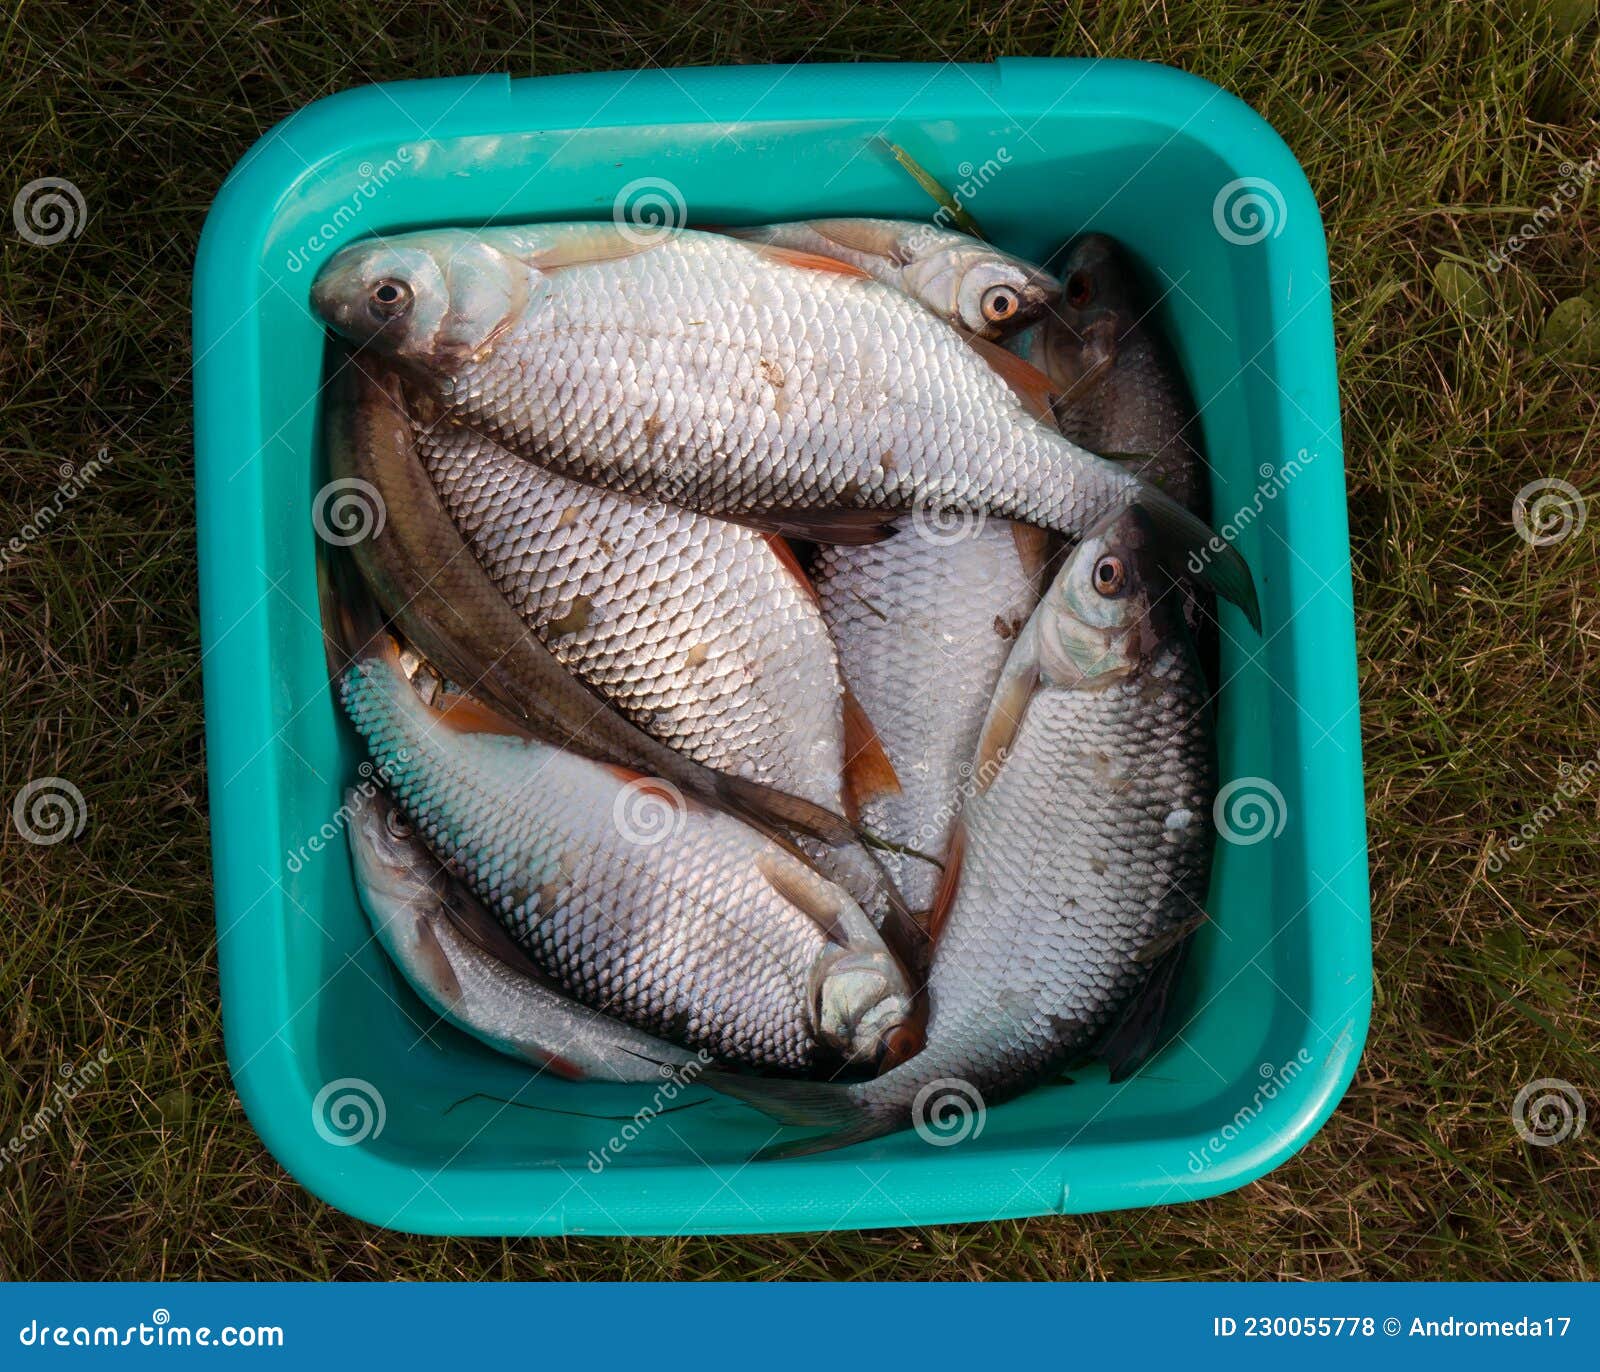 Fish in a Bucket, Bucket Full of Fish, Fishing. Roaches in a